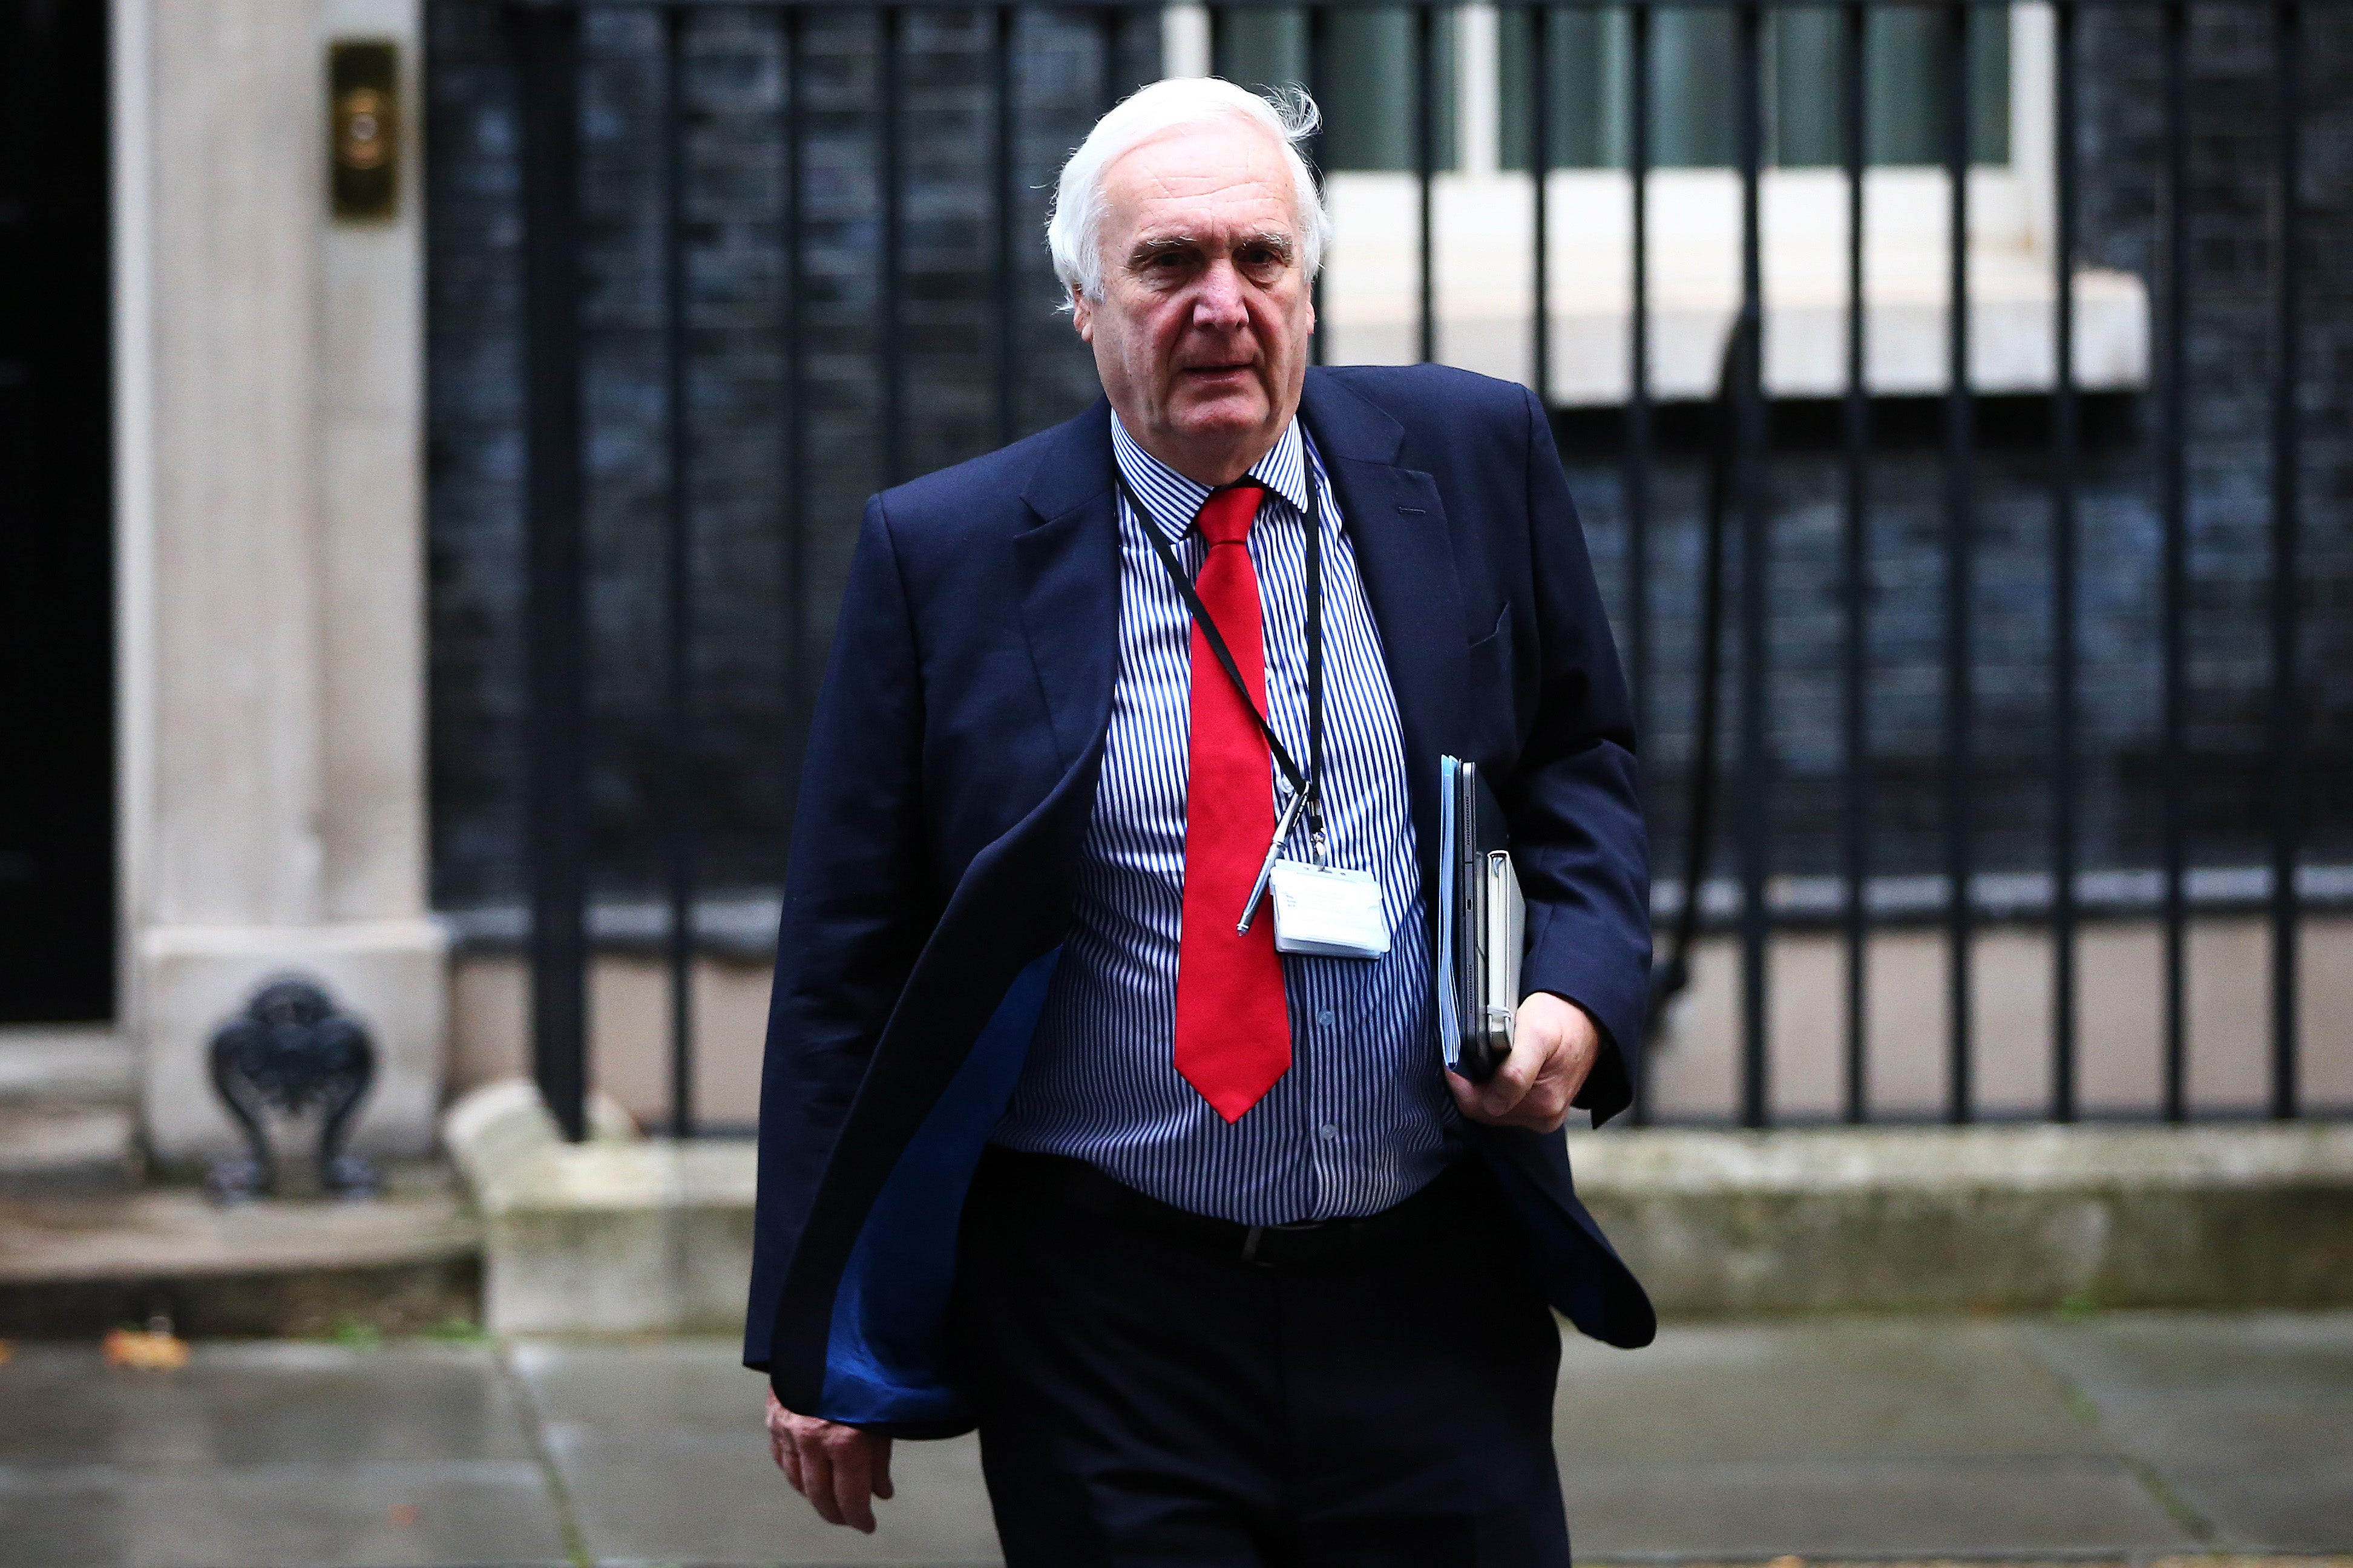 Sir Edward Lister has been announced as interim chief of staff following the Downing Street shake-up